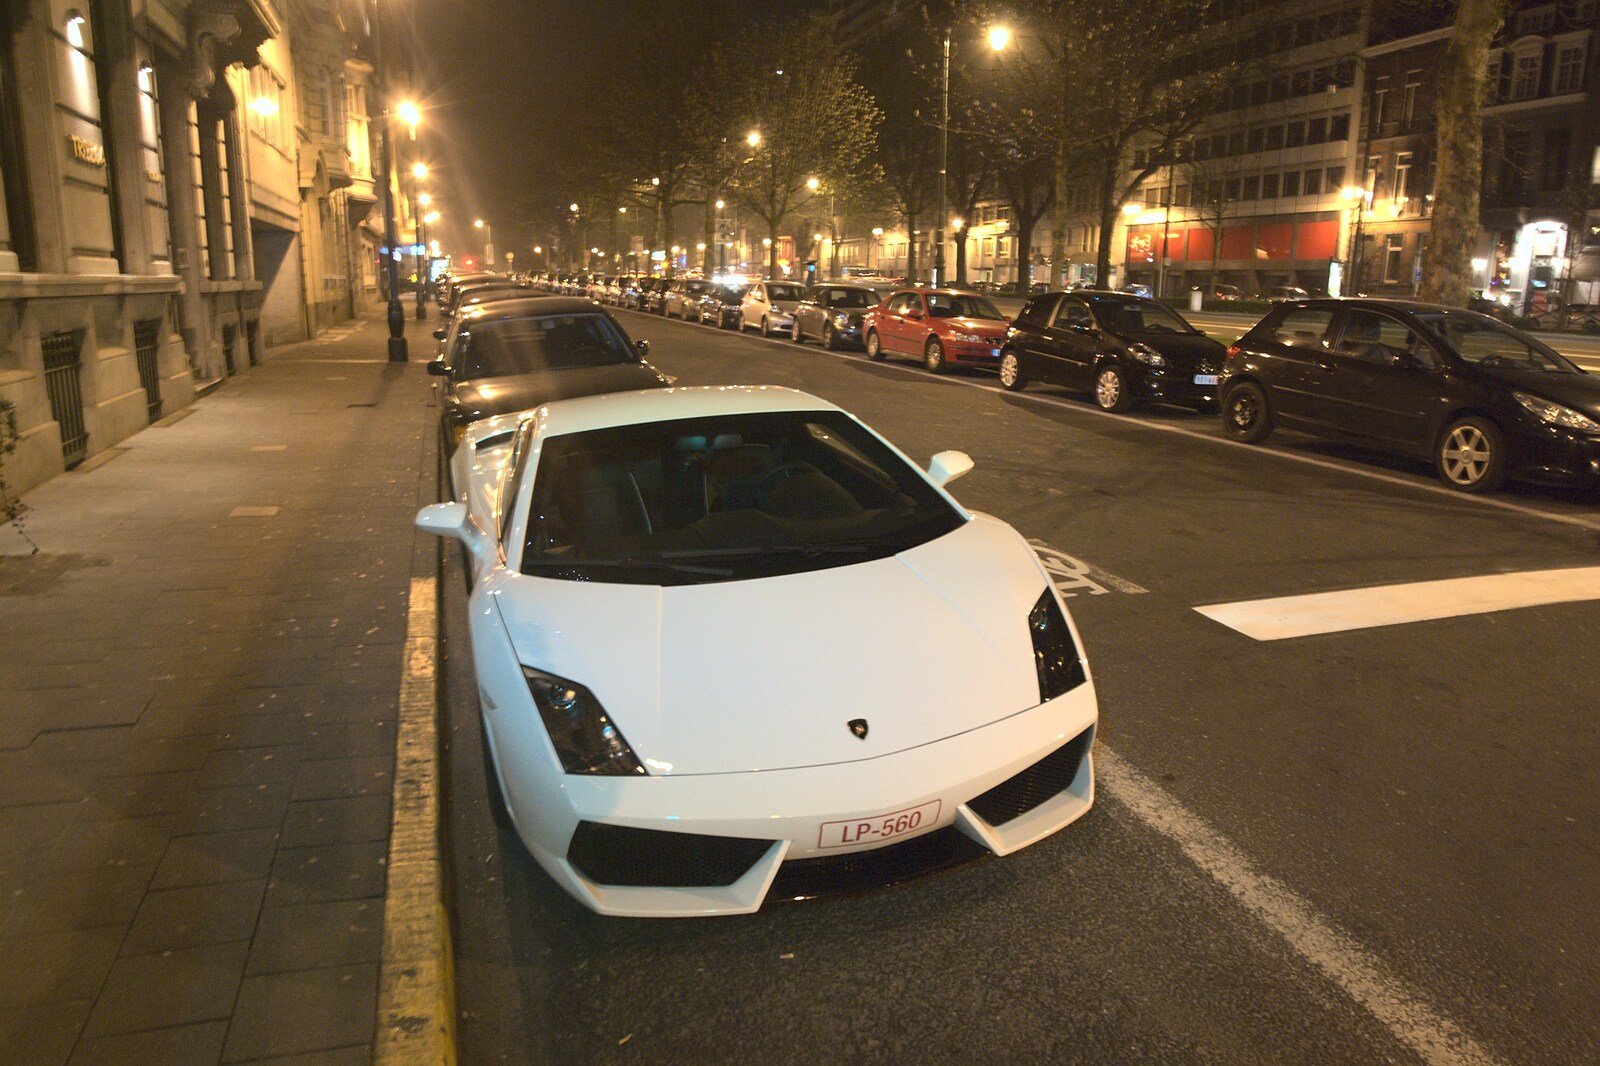 A Lambourghini waits outside a restaurant from A Day Trip to Brussels, Belgium - 5th April 2009